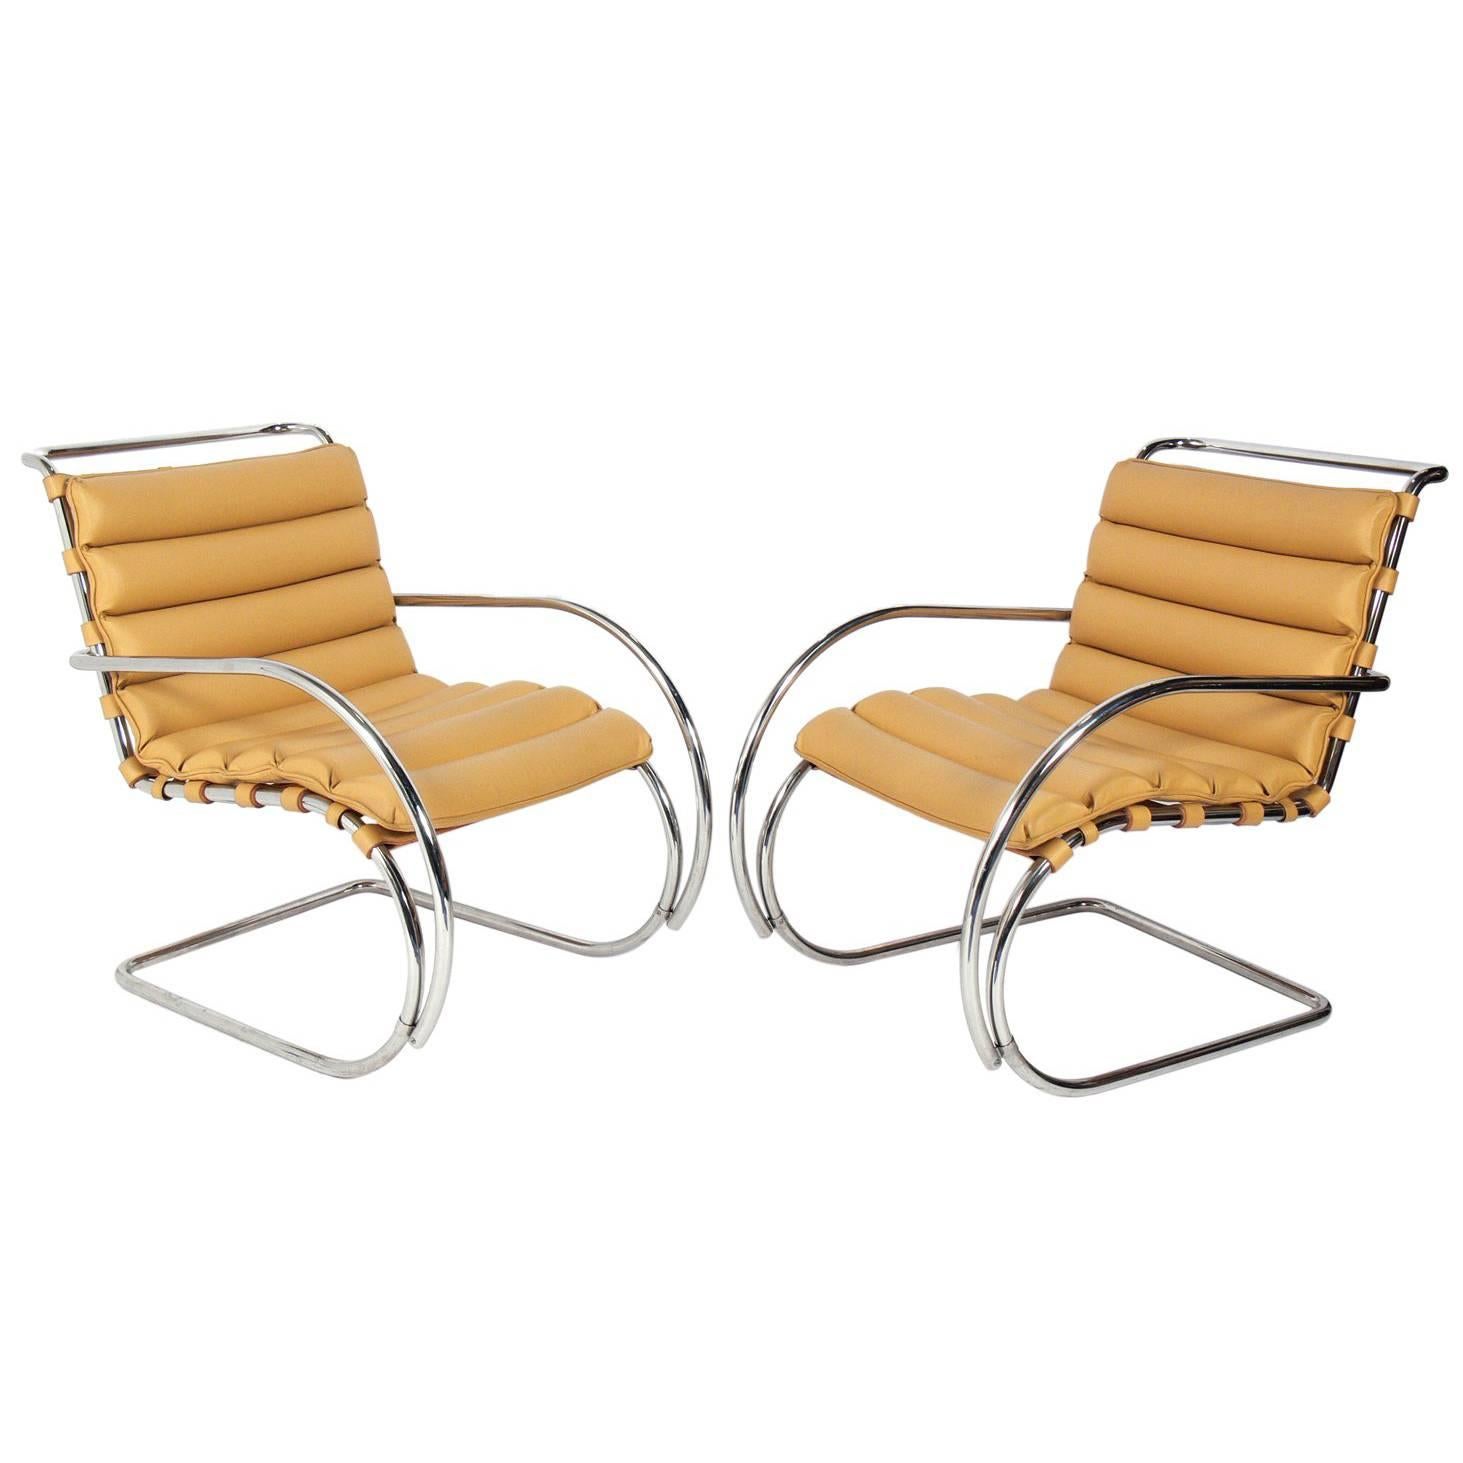 Pair of MR Lounge Chairs by Mies Van Der Rohe for Knoll